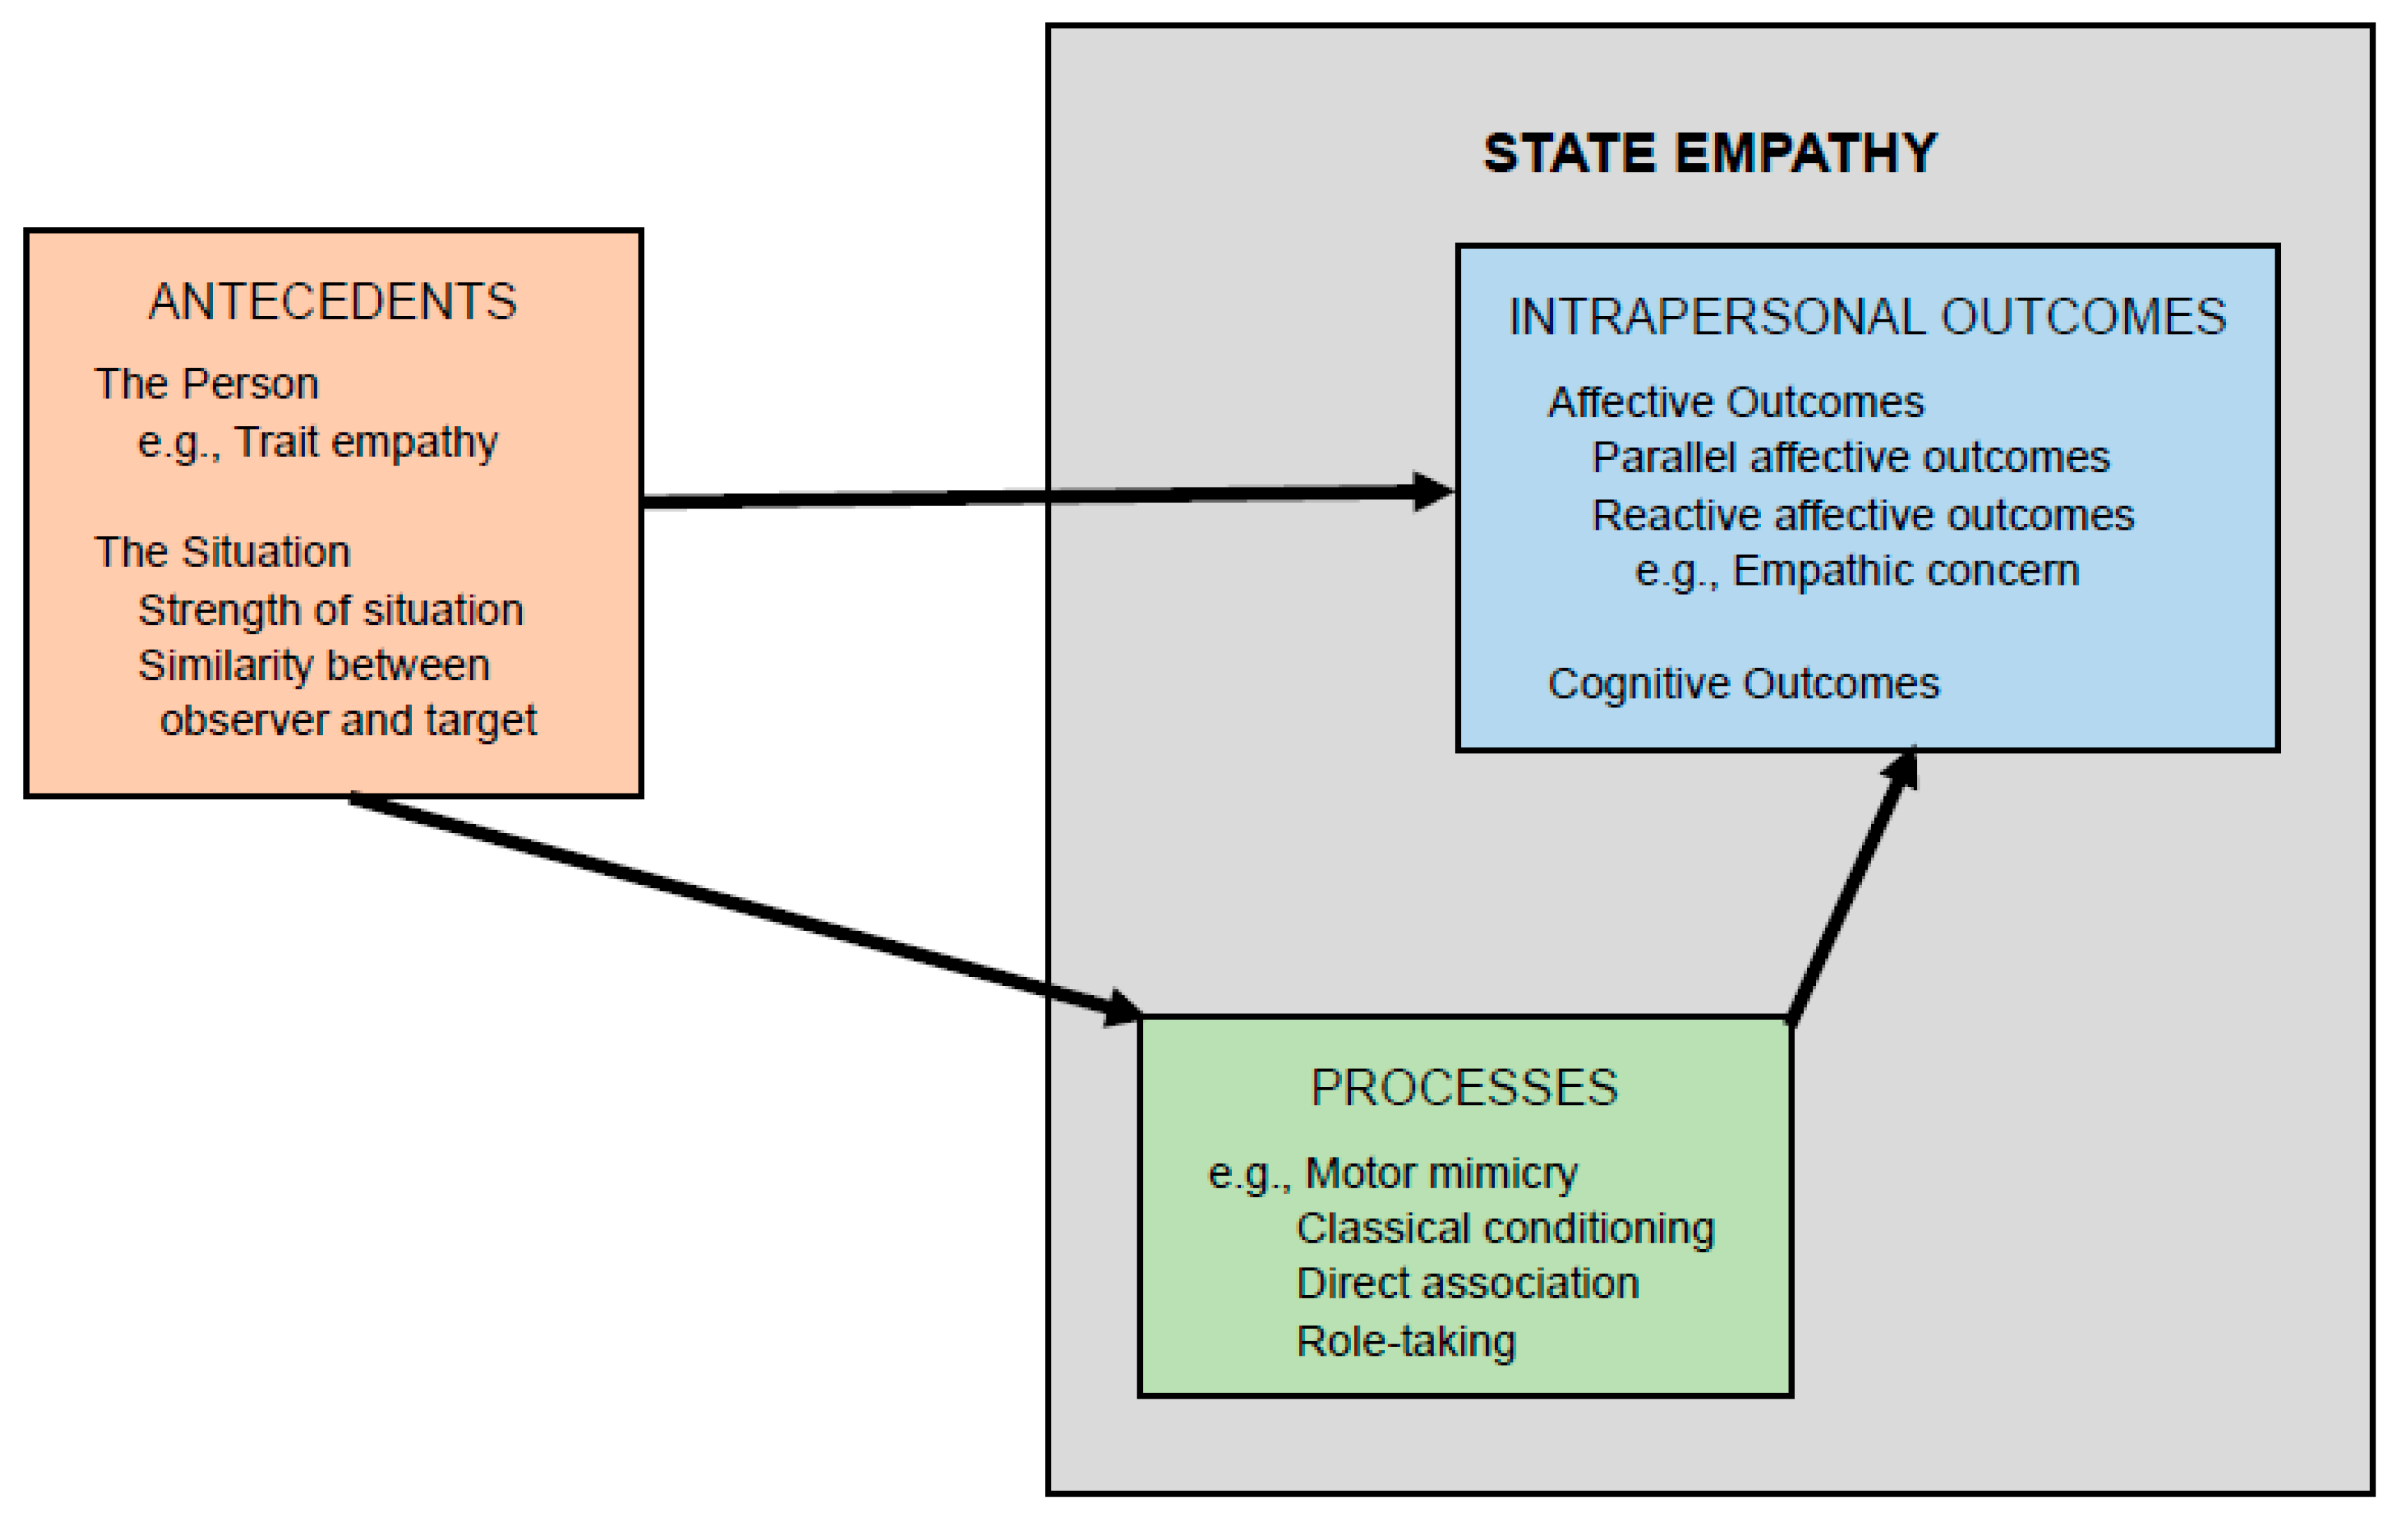 Literature Review: Defining (and measuring) Empathy - Empathetic Media